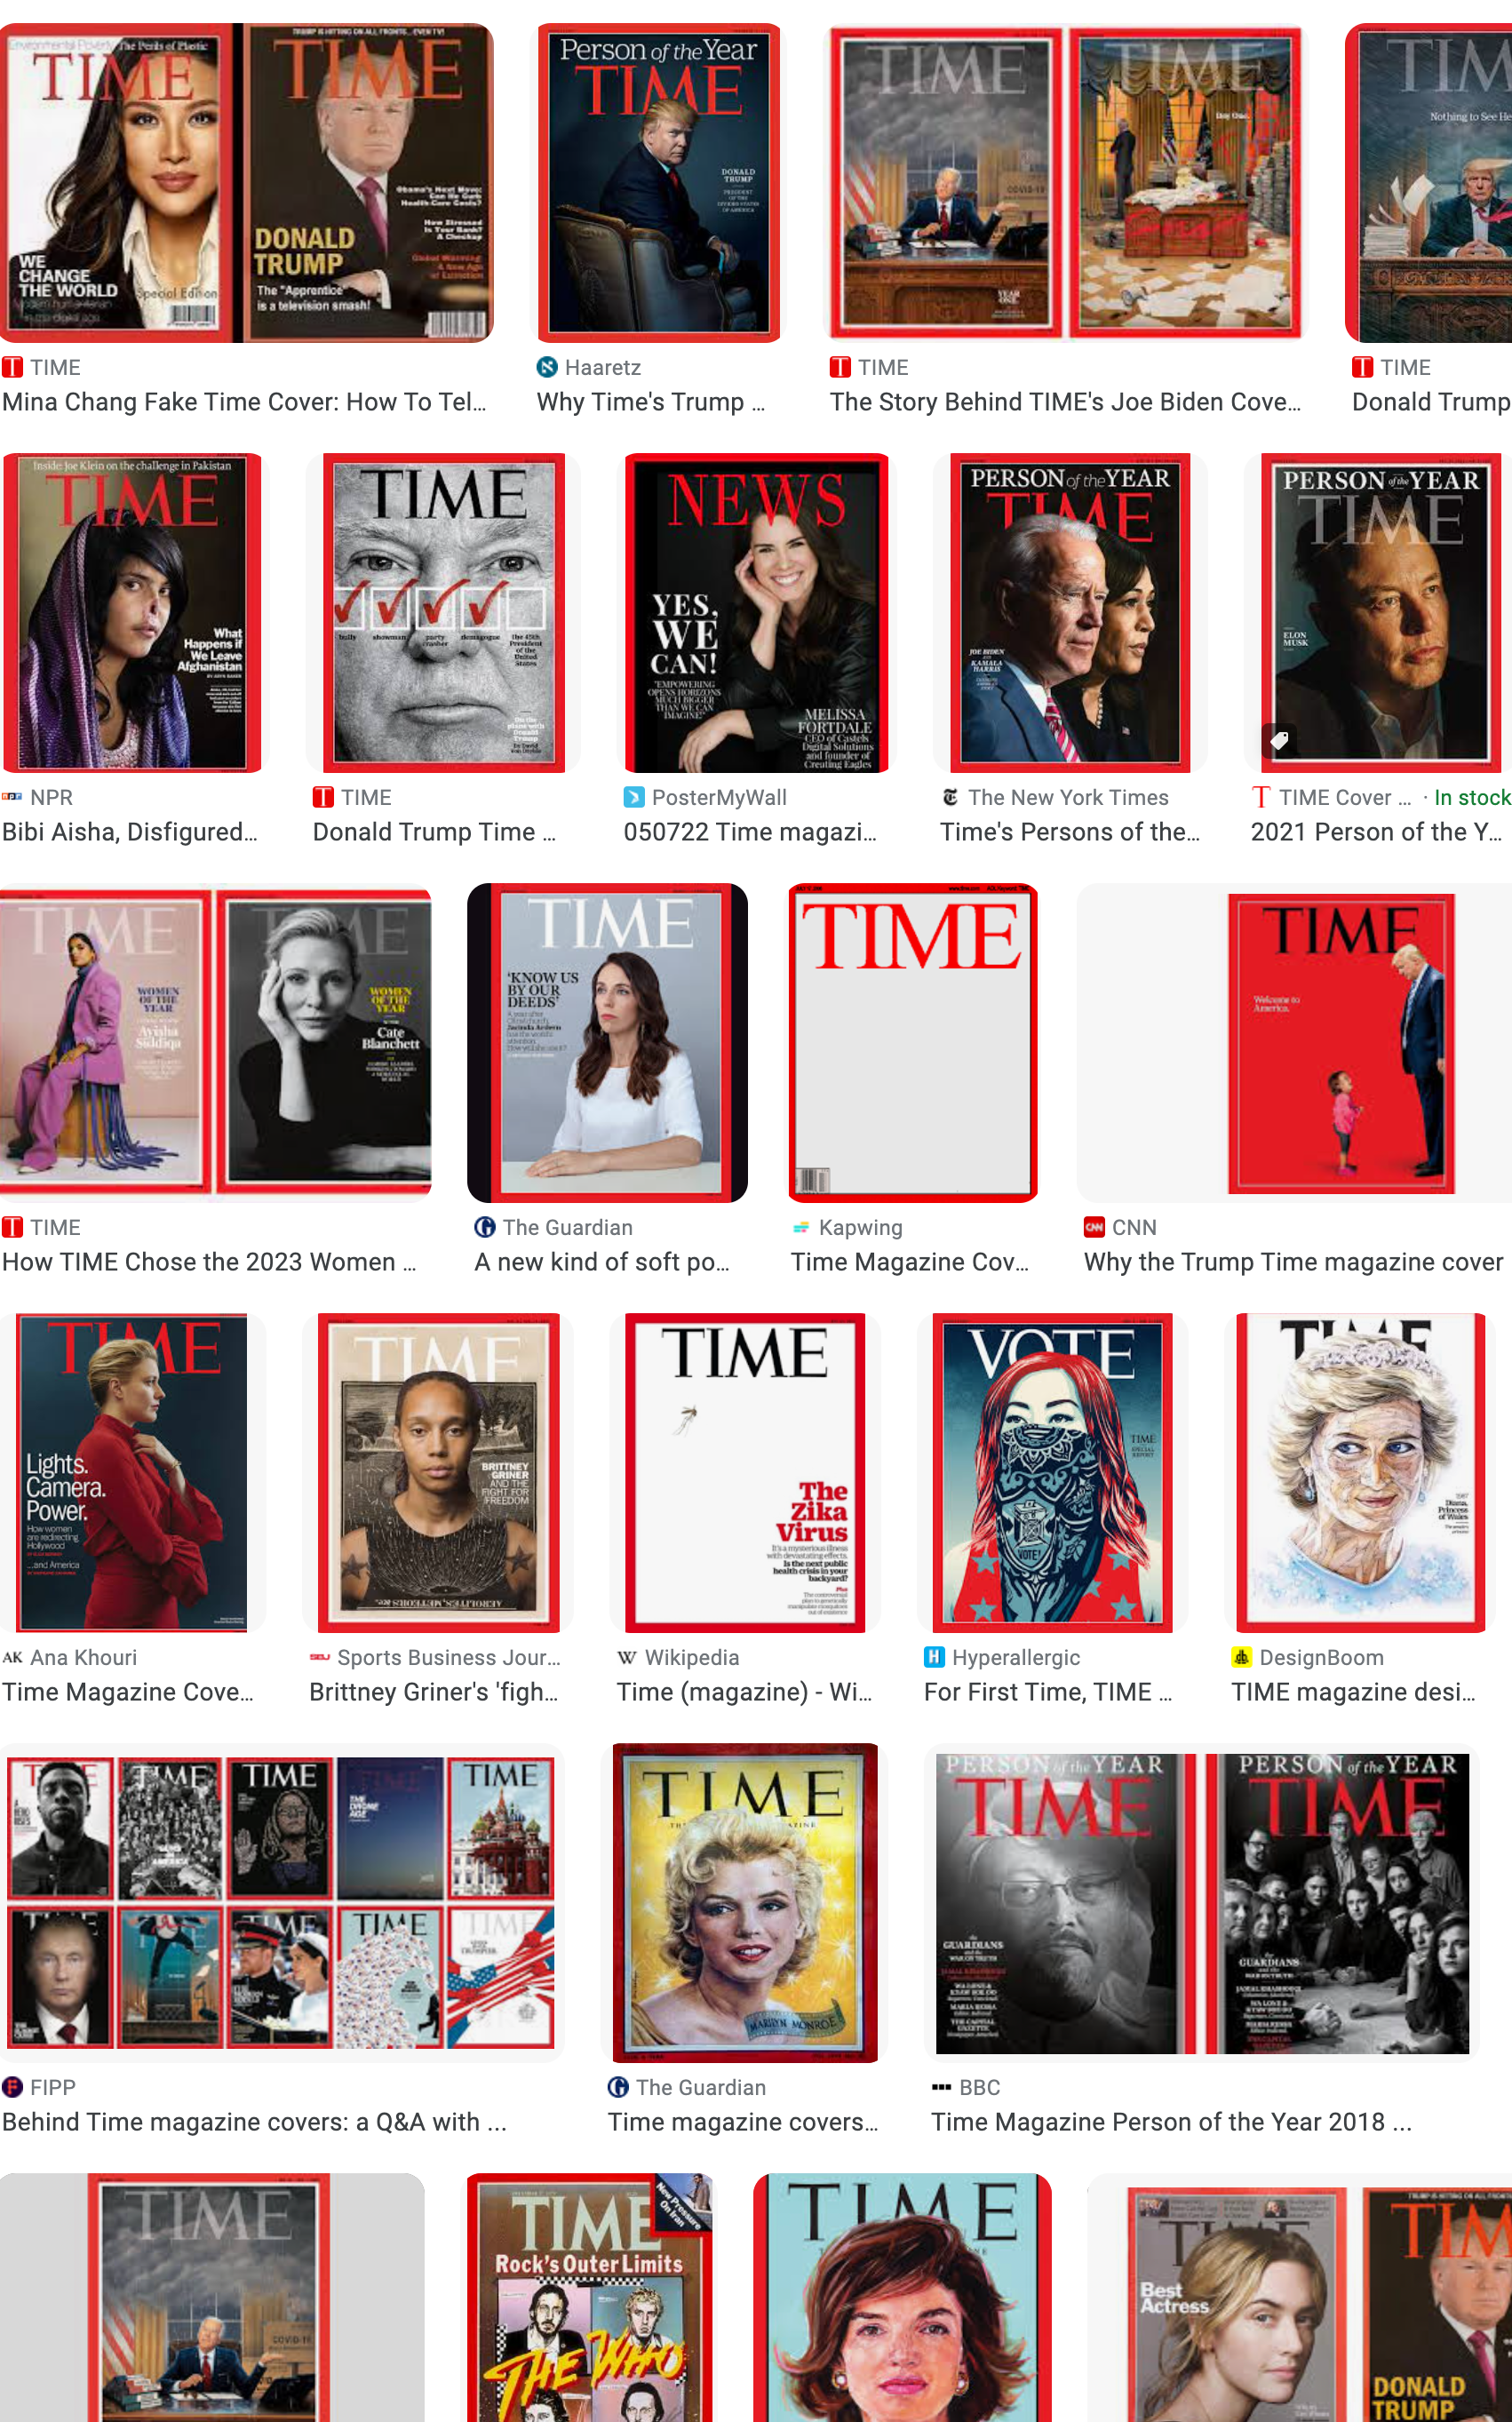 Google search results for time magazine cover shows similarly branded images